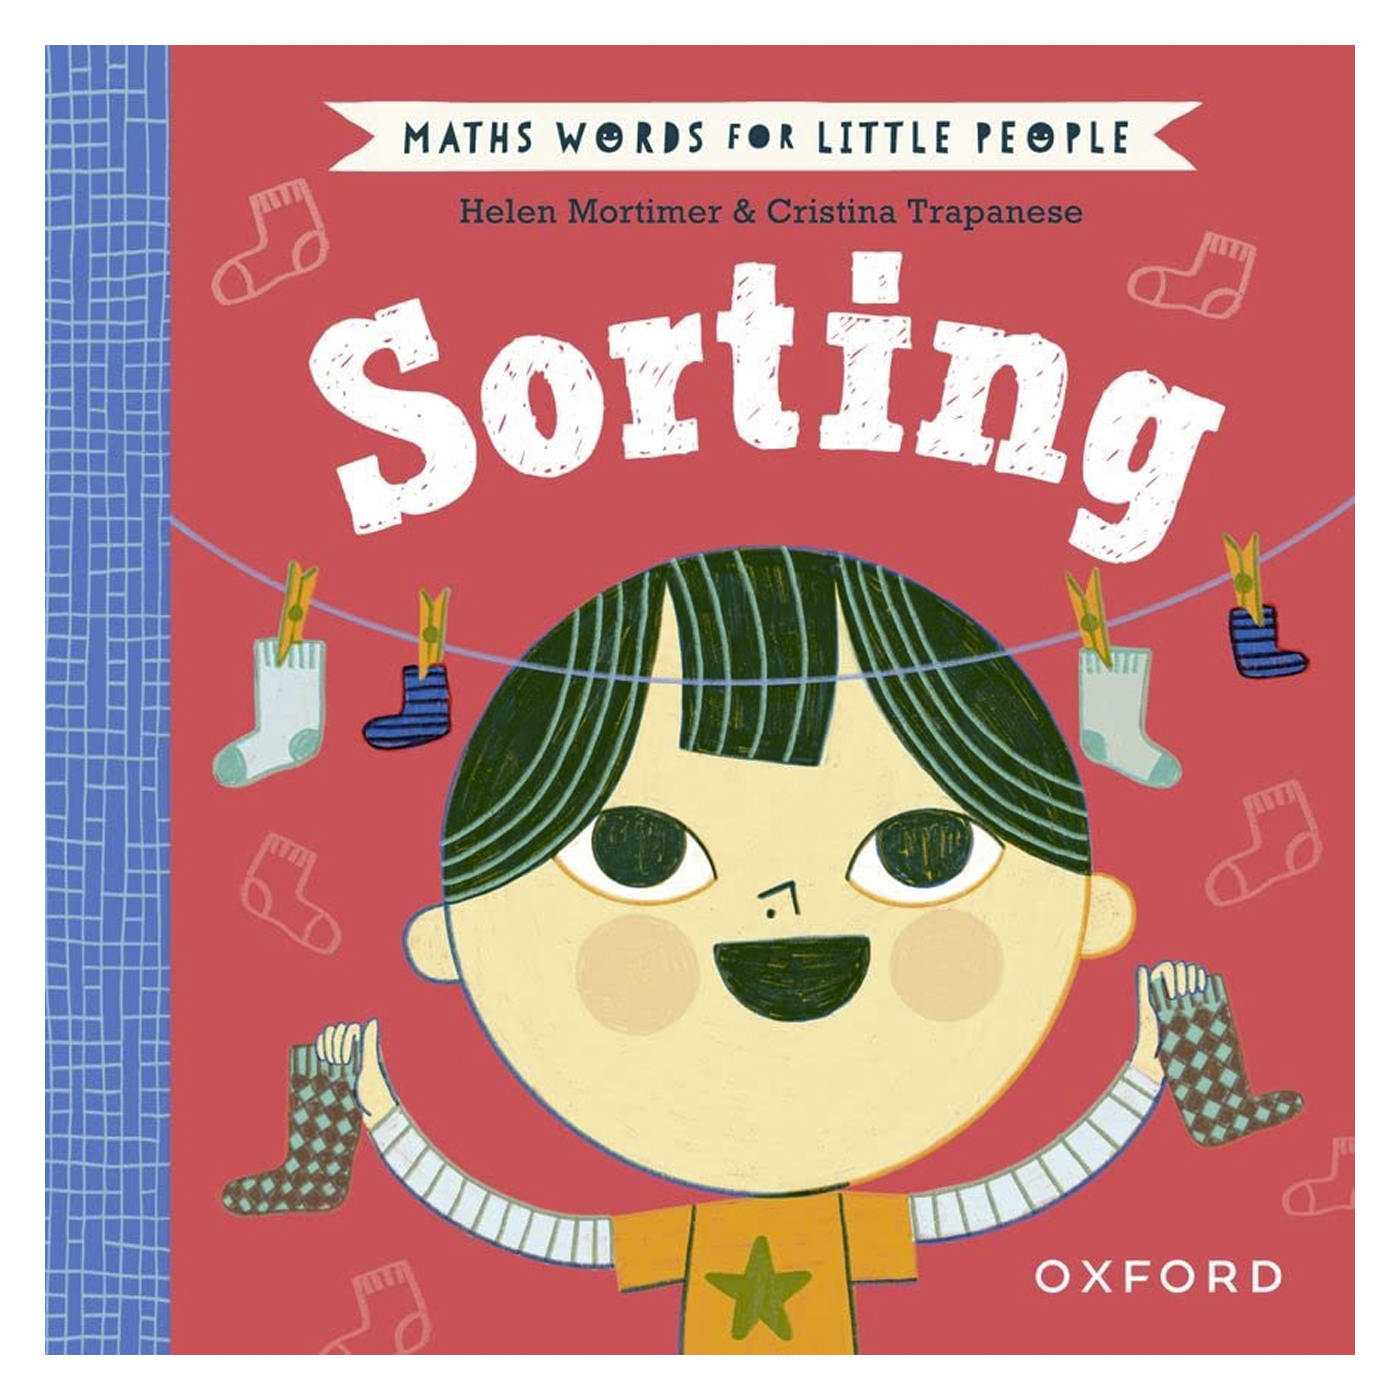 OXFORD CHILDRENS BOOK Maths Words For Little People: Sorting